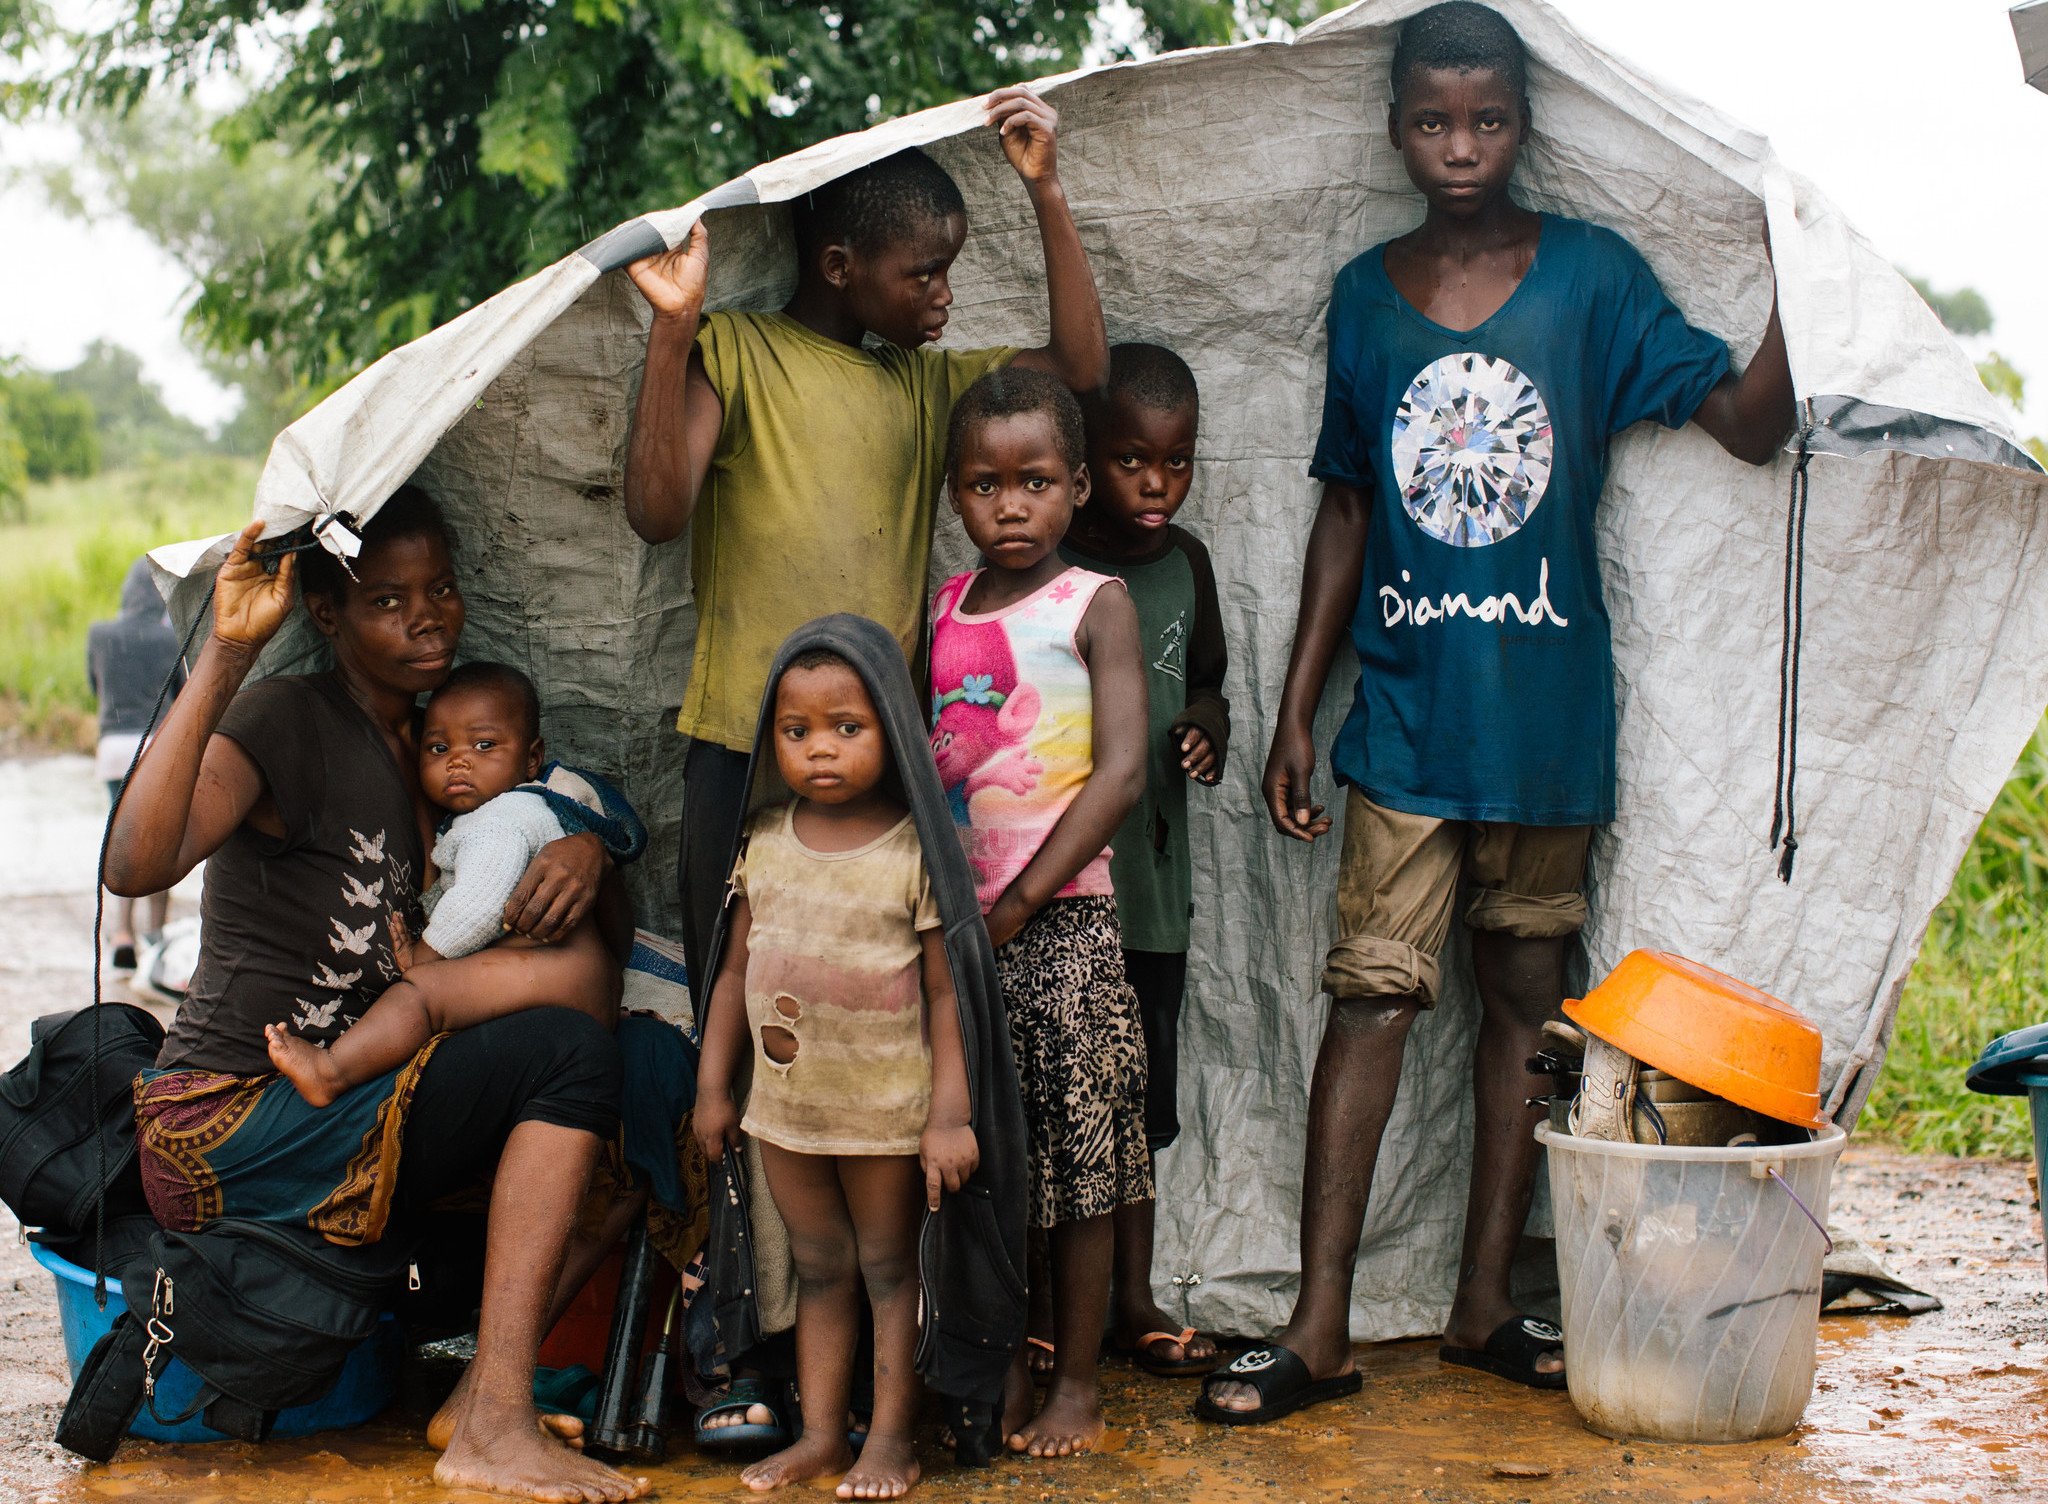 Every family at the evacuation centre has their own story of escape. Here, Maria, 31, and her six children with their only belongings are sheltering from the rain by the side of the road. Just 24 hours before this photo was taken, the rain came and the river banks burst causing their home to flood. Fearing another cyclone was coming, they gathered all their life belongings and left for higher ground. (Photo: Elena Heatherwick / Oxfam)